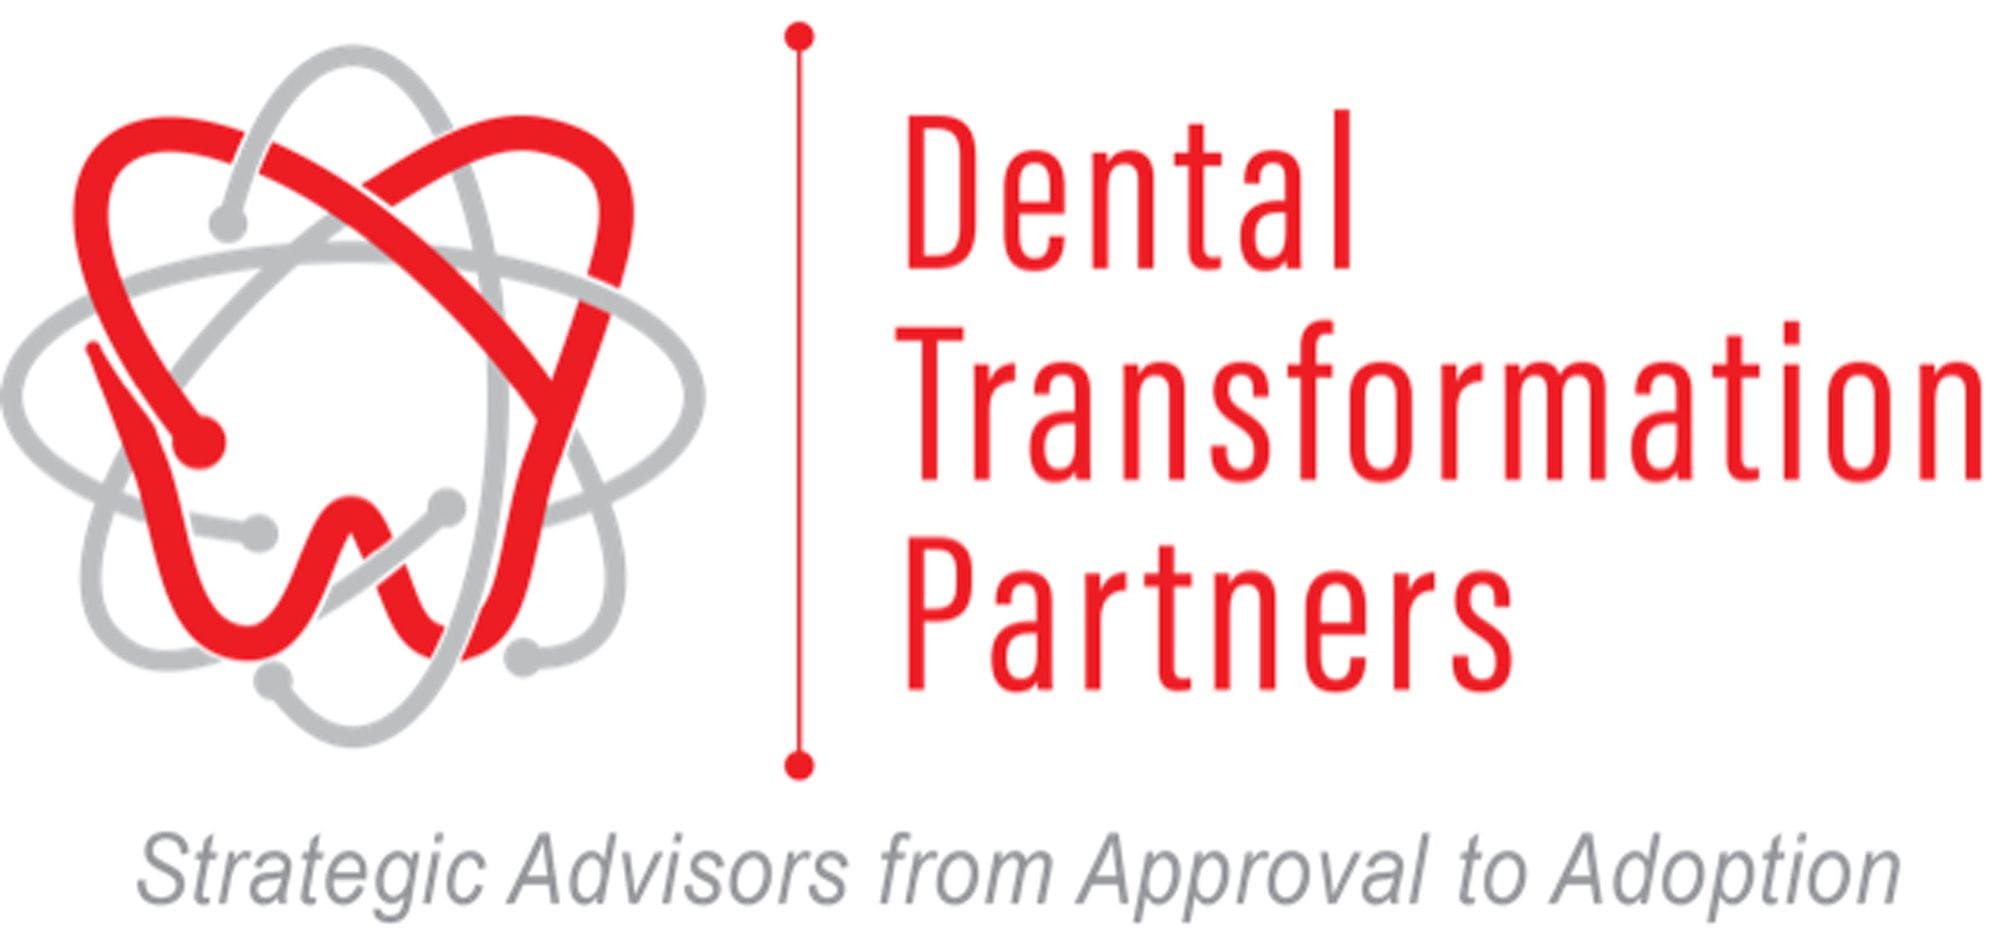 New Alliance Dental Transformation Partners Founded by Industry Experts